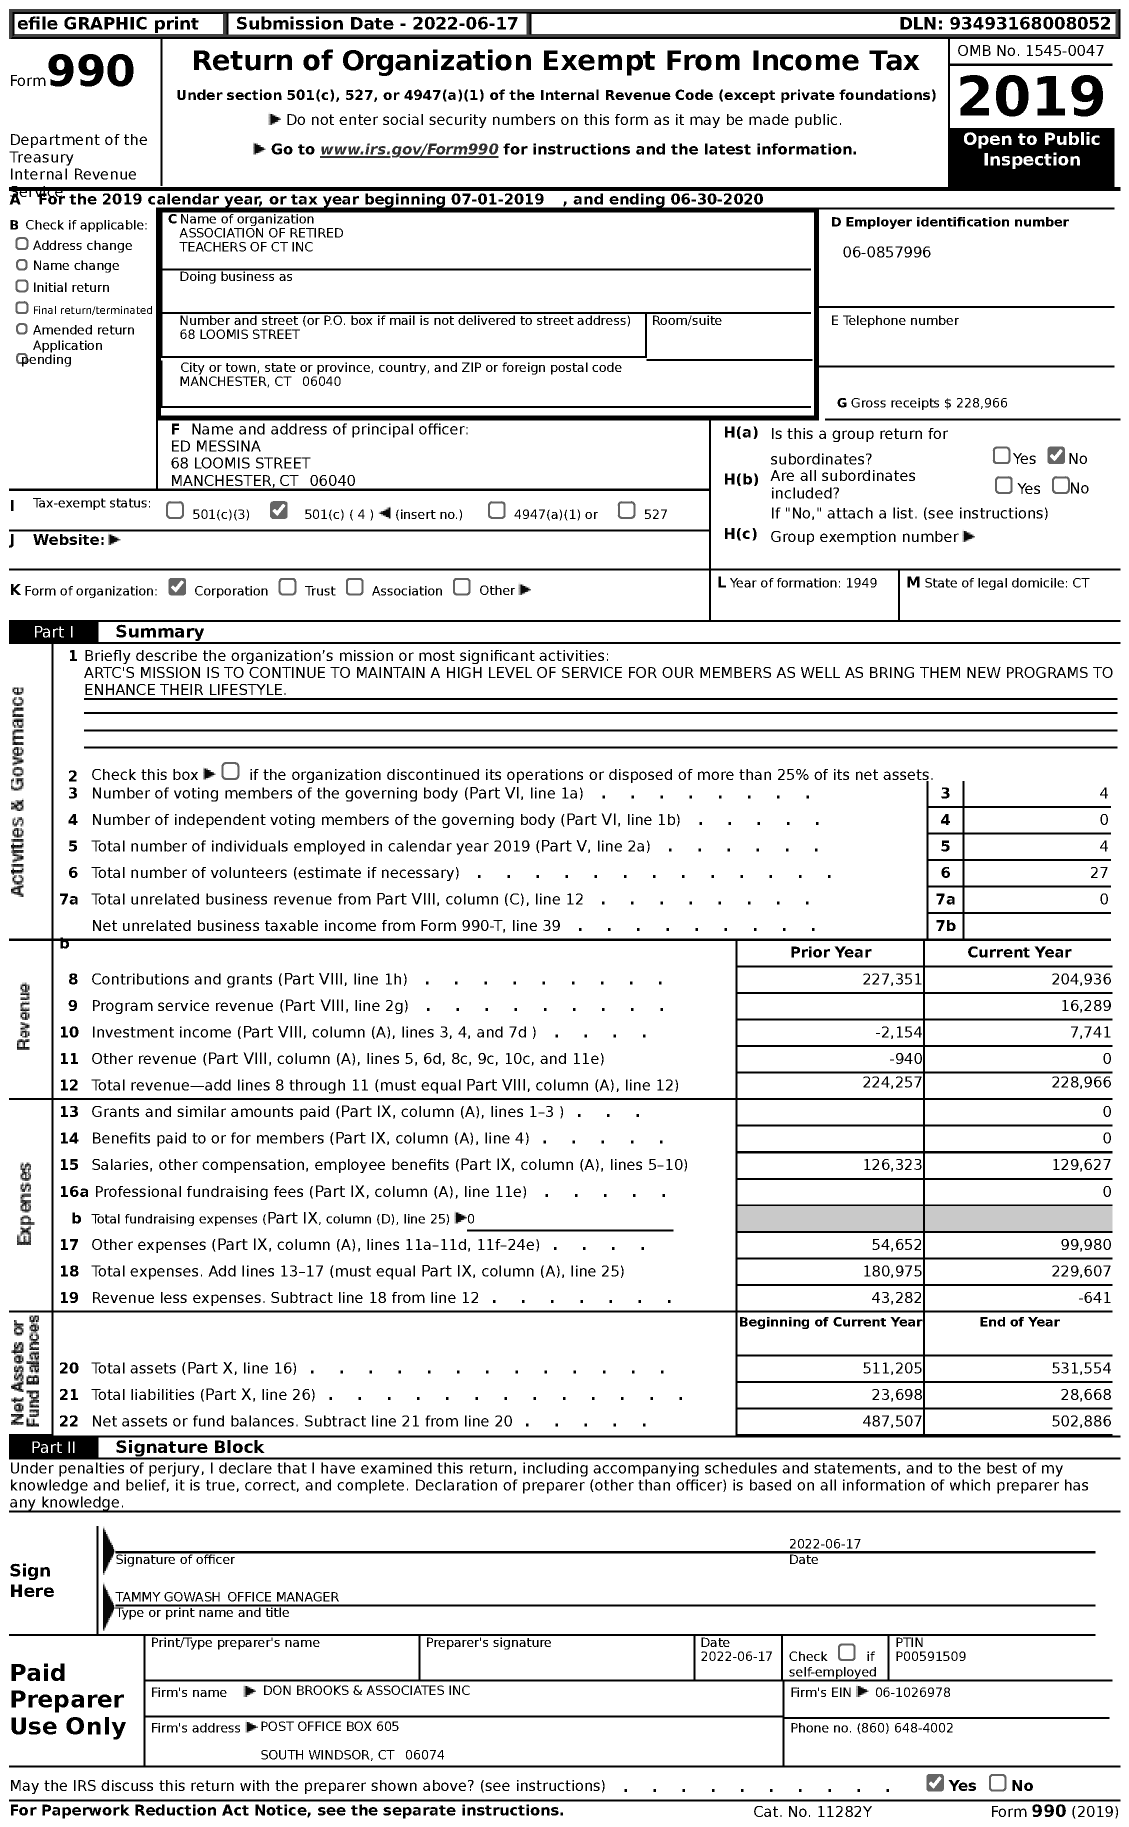 Image of first page of 2019 Form 990 for Association of Retired Teachers of CT